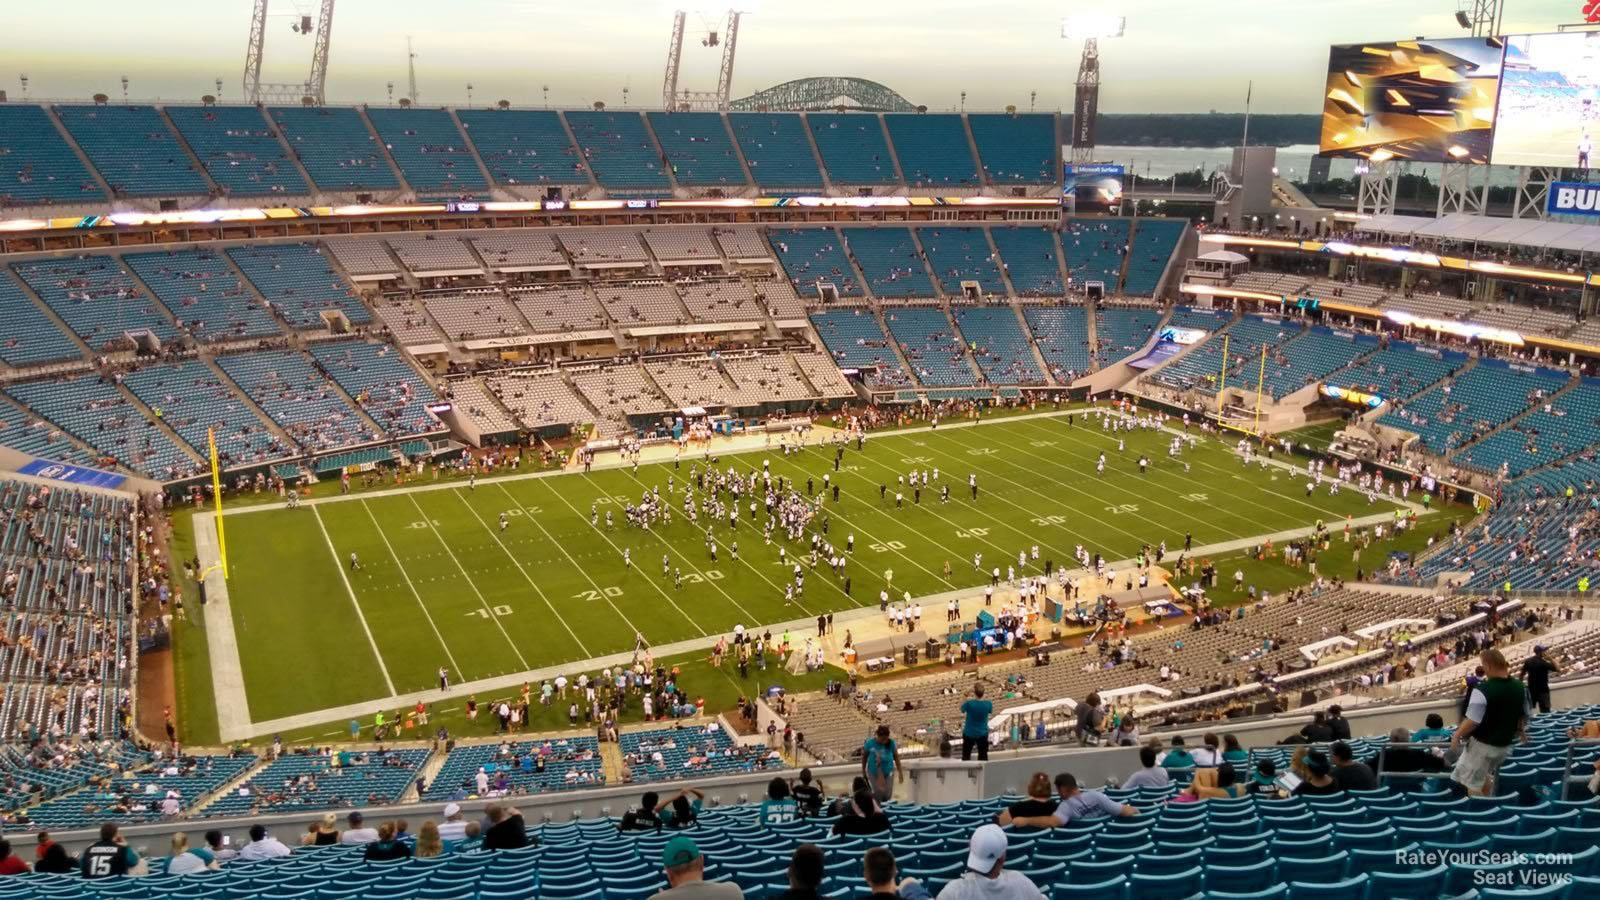 section 414, row bb seat view  - tiaa bank field